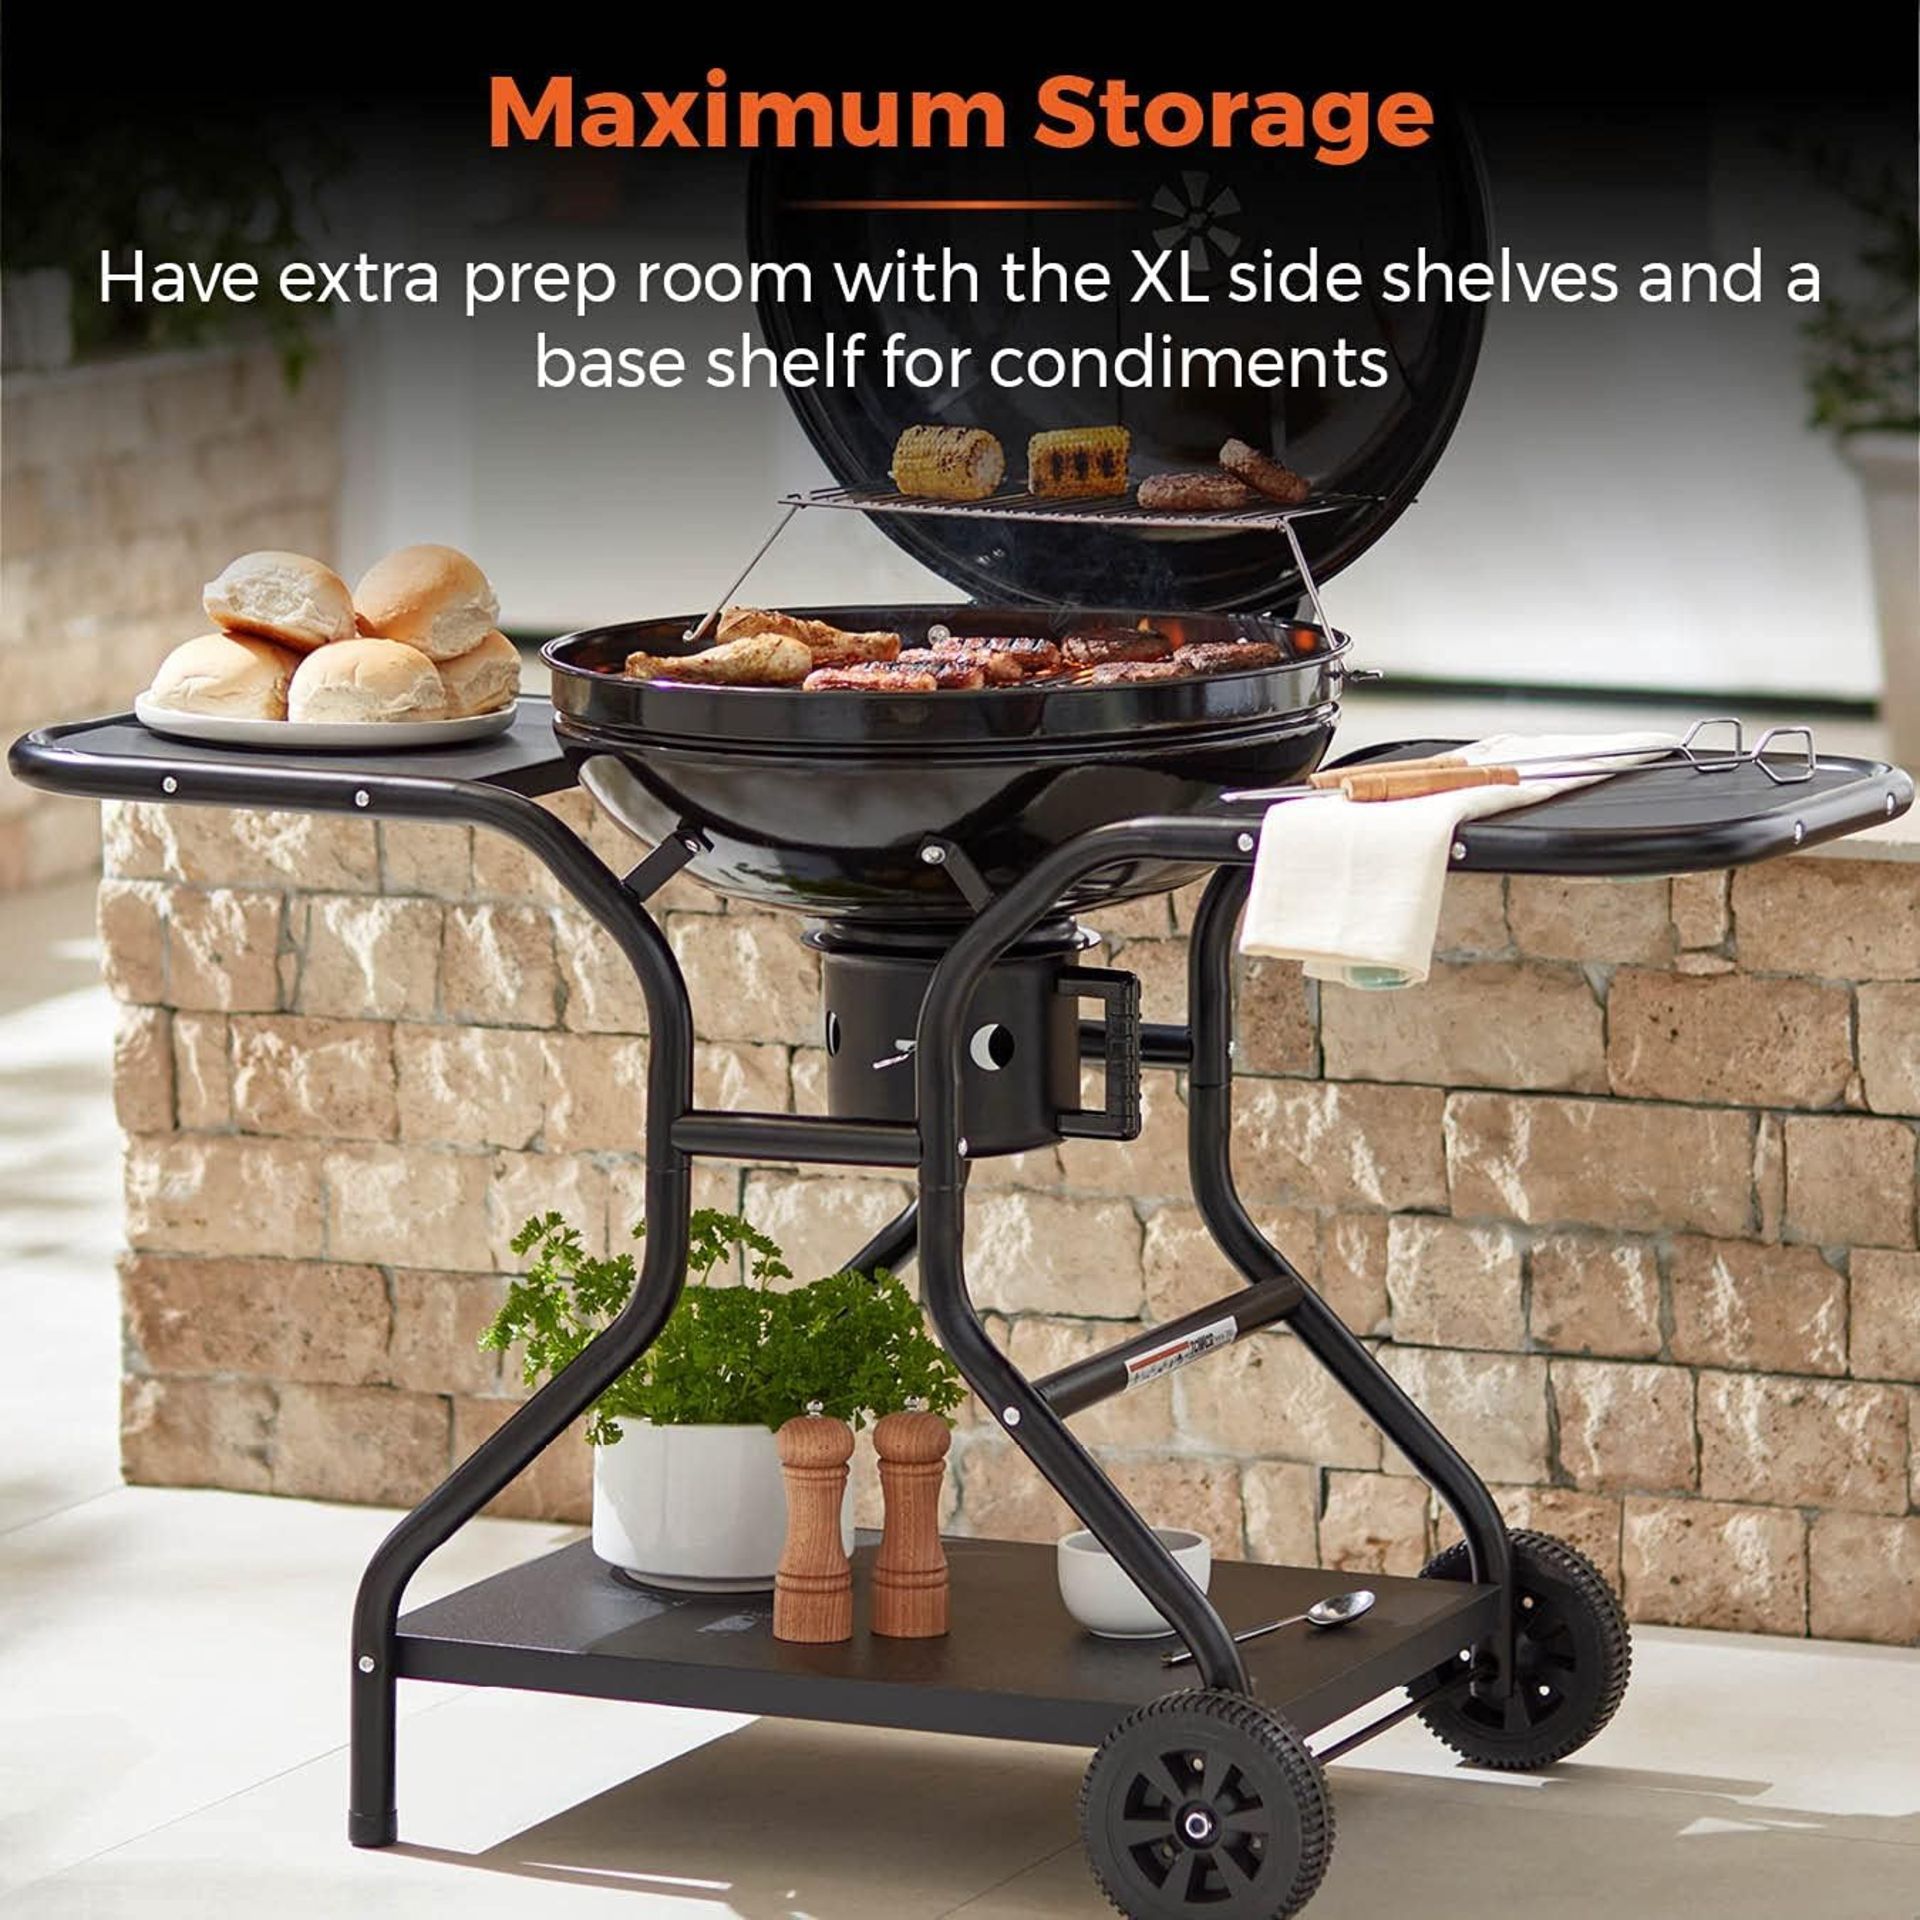 BRAND NEW TOWER Charcoal BBQ Grill With Tables. RRP £179.99 EACH. Grill some delicious ingredients - Image 3 of 4